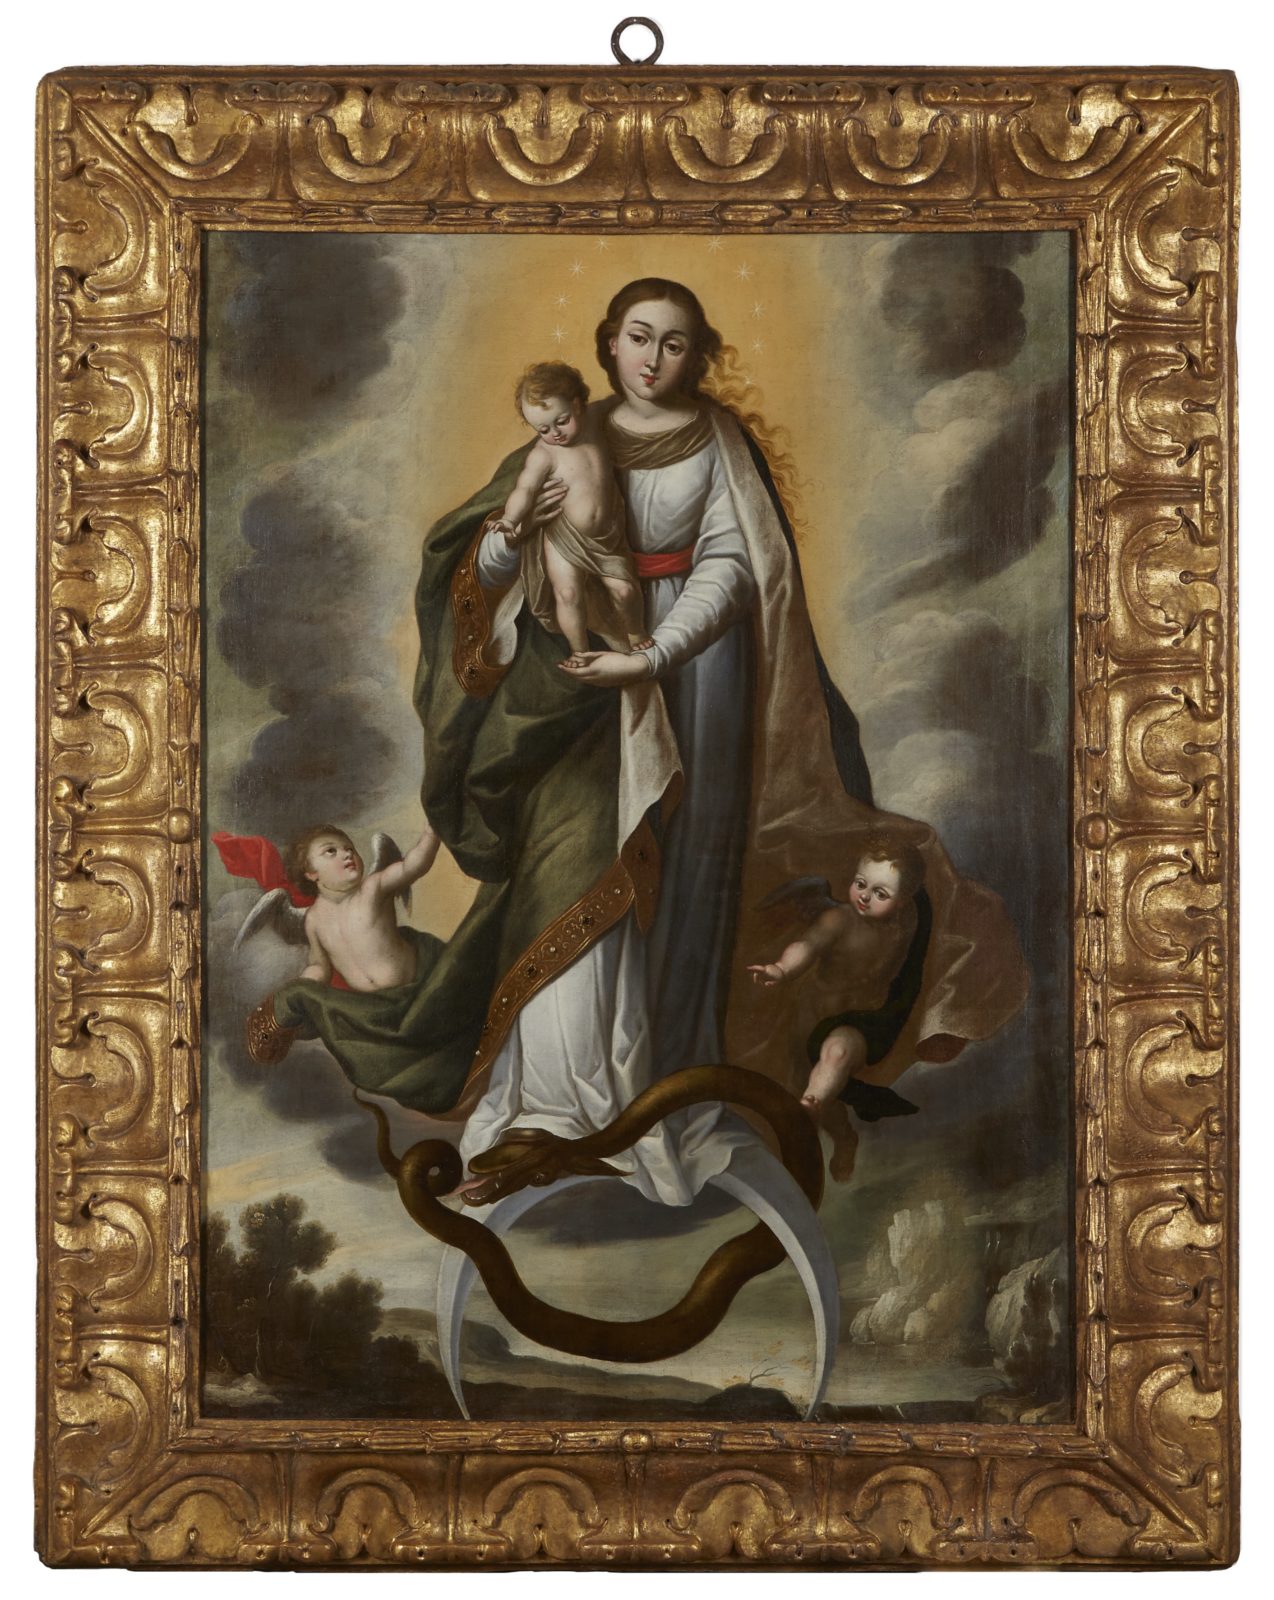 A painting depicting the woman of the Apocalypse, derived from the biblical book of Revelations 12.